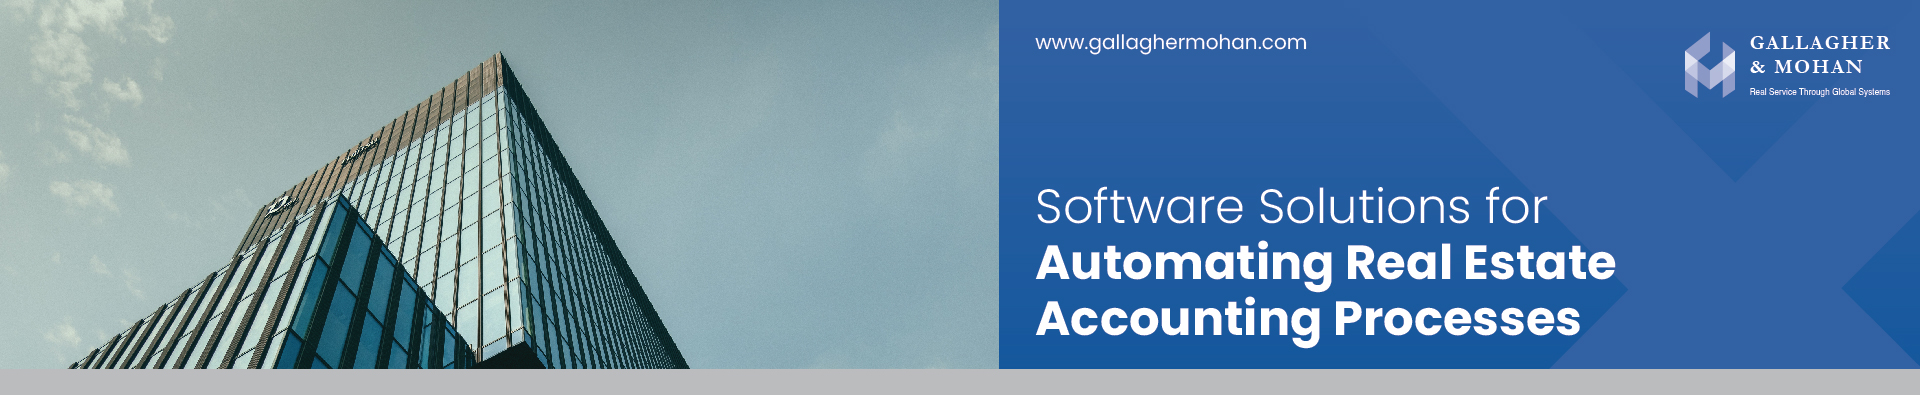 Software Solutions For Automating Real Estate Accounting Processes